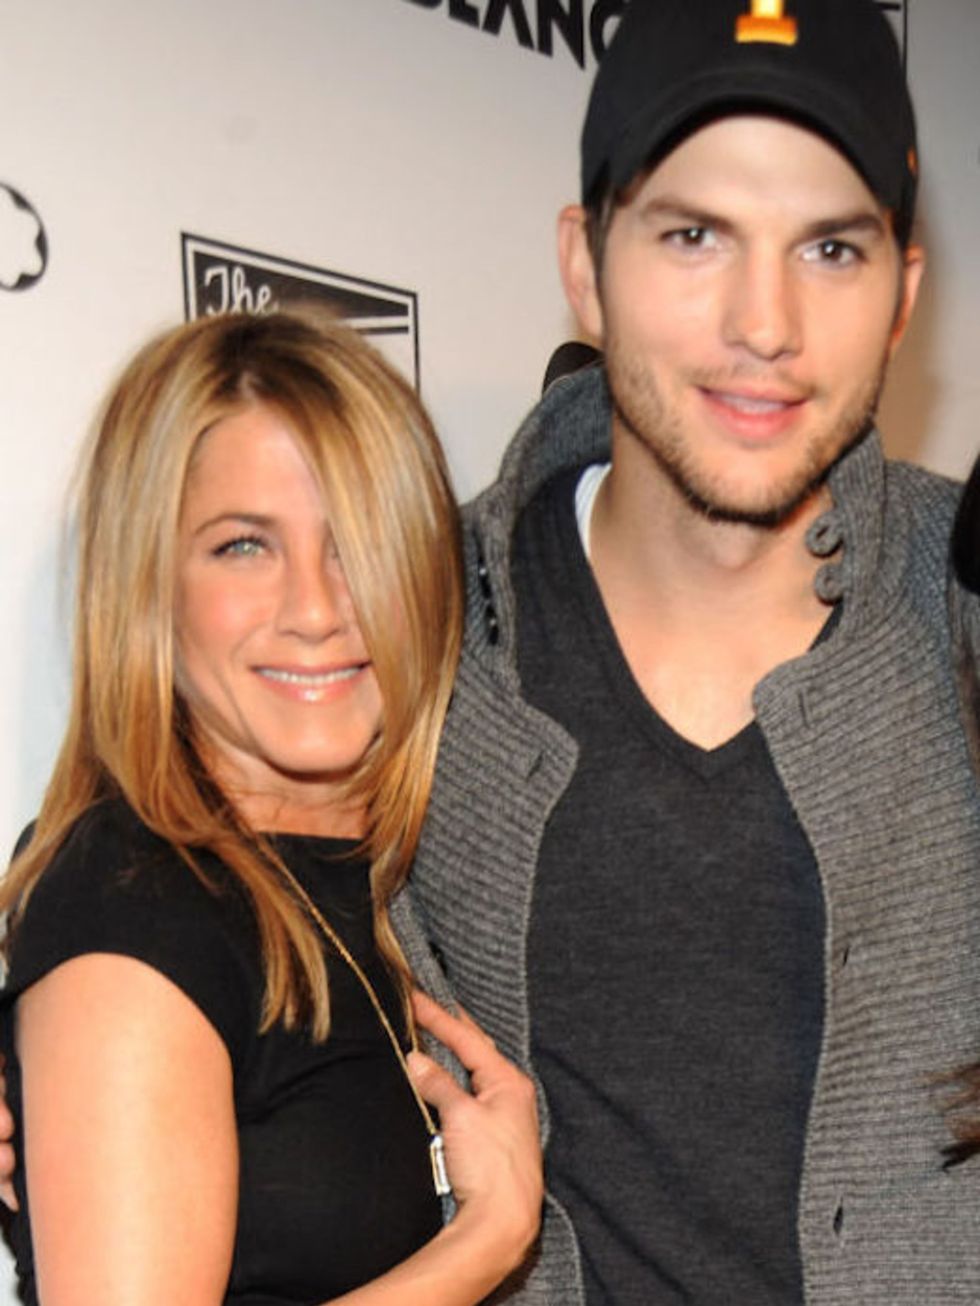 <p><strong>Ashton Kutcher</strong></p>

<p>It's only fitting that the former Punkd host would make a bet with his friends on teen crush Jen Aniston.  He<a href="http://radaronline.com/" target="_blank"> got real in 2011</a>: "I was 17 years old and she wa